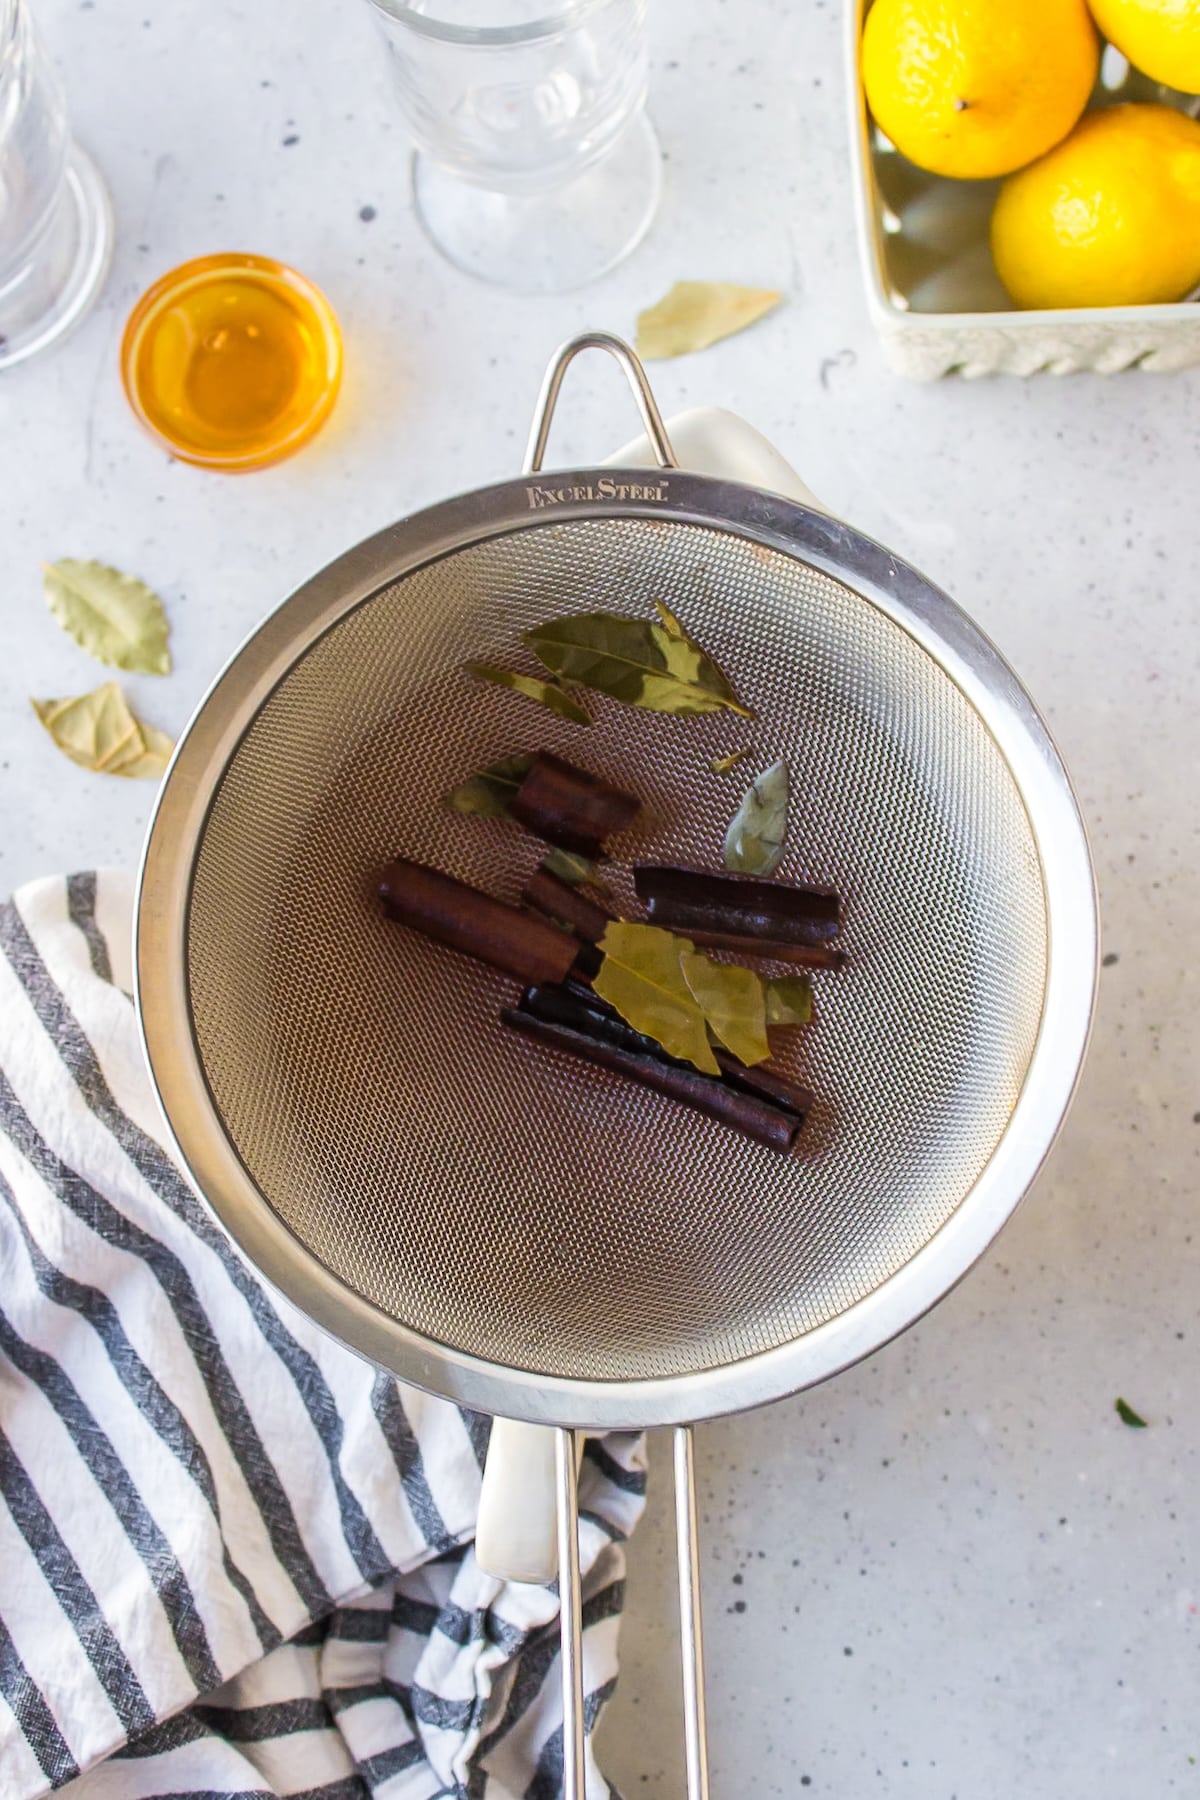 bay leaves and cinnamon sticks in a strainer.